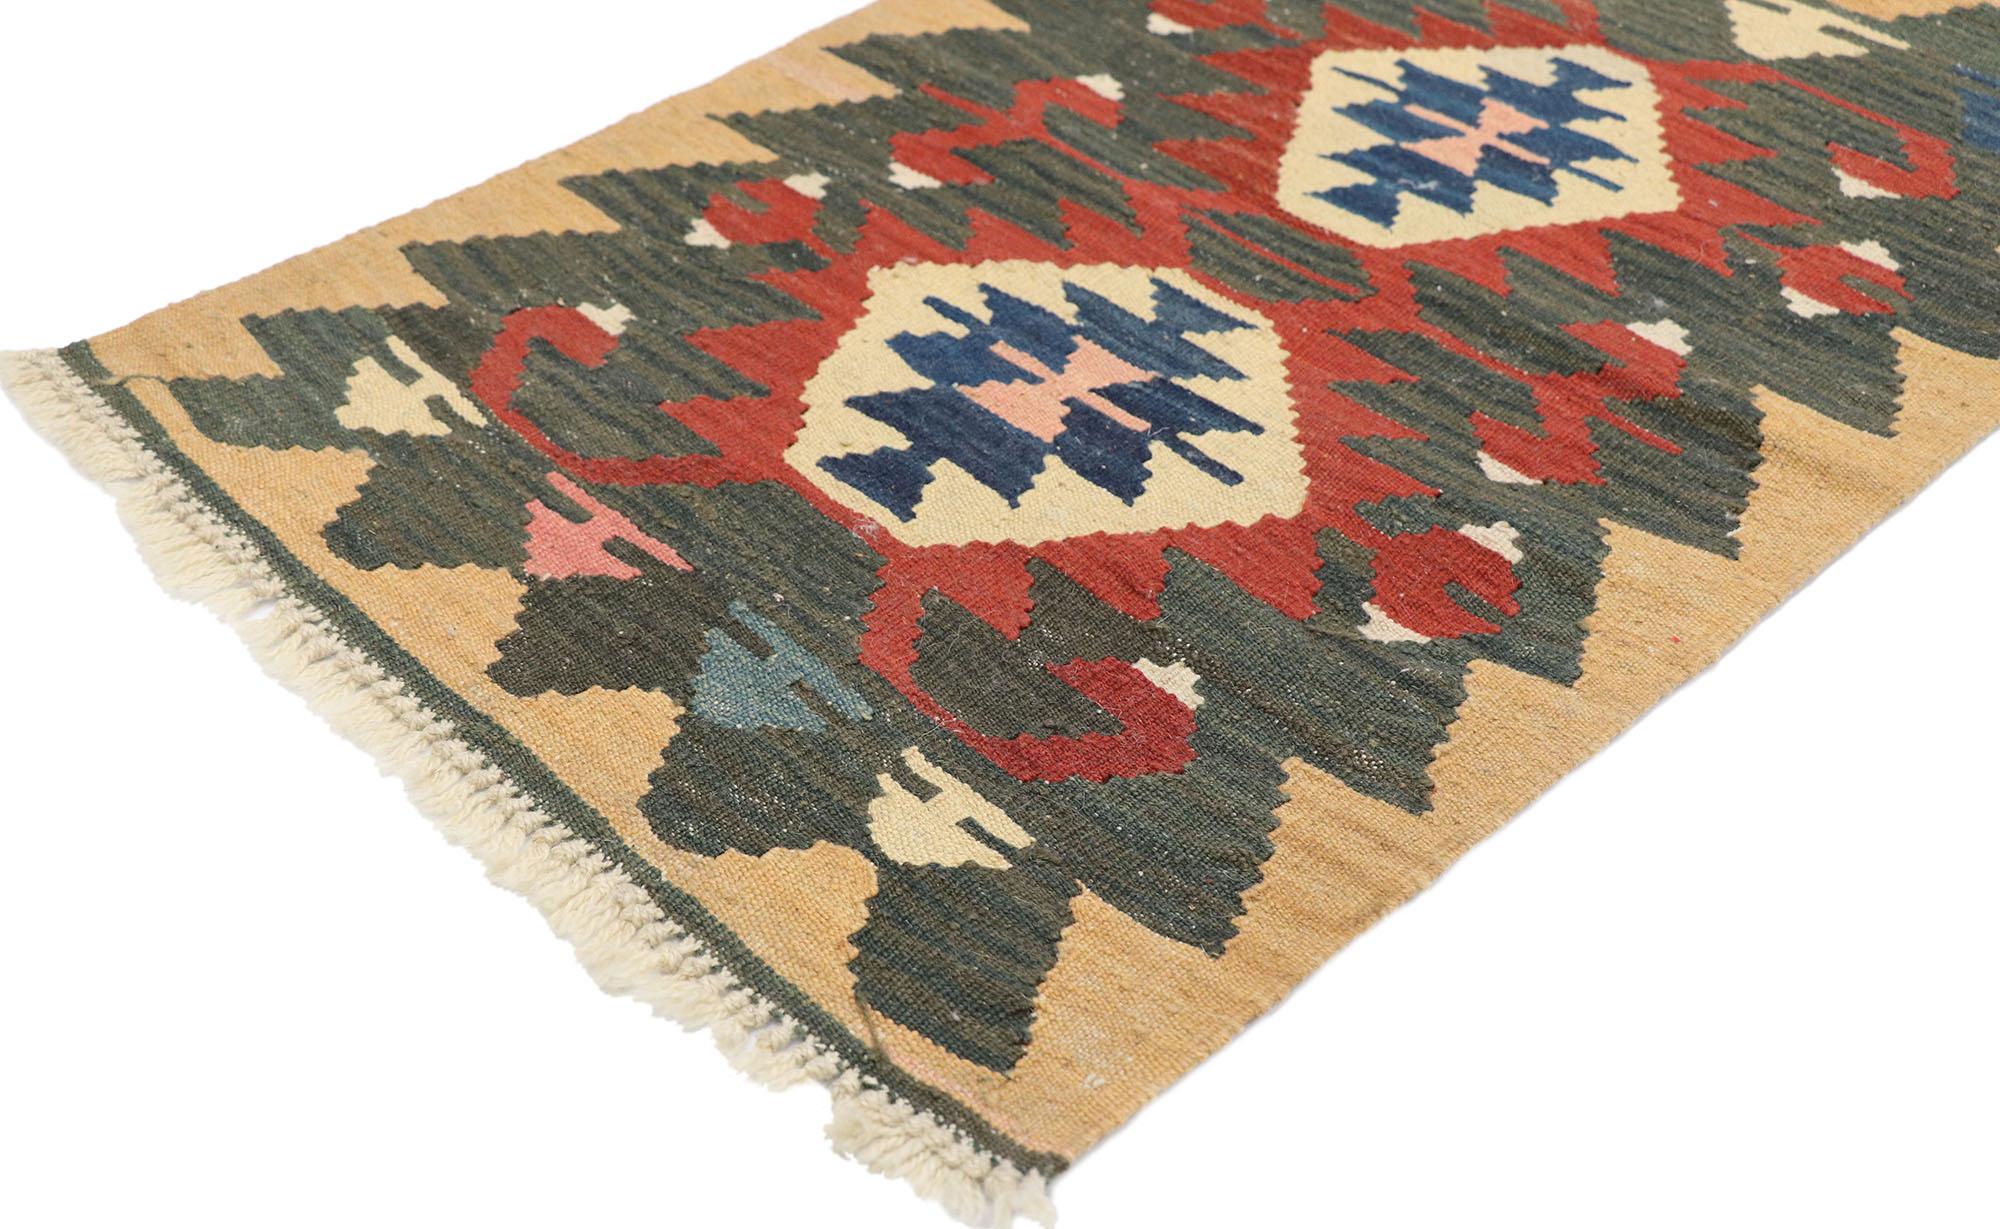 77886, Vintage Persian Shiraz Kilim rug with Tribal Style 01'11 x 02'10. Full of tiny details and a bold expressive design combined with vibrant colors and tribal style, this hand-woven wool vintage Persian Shiraz kilim rug is a captivating vision